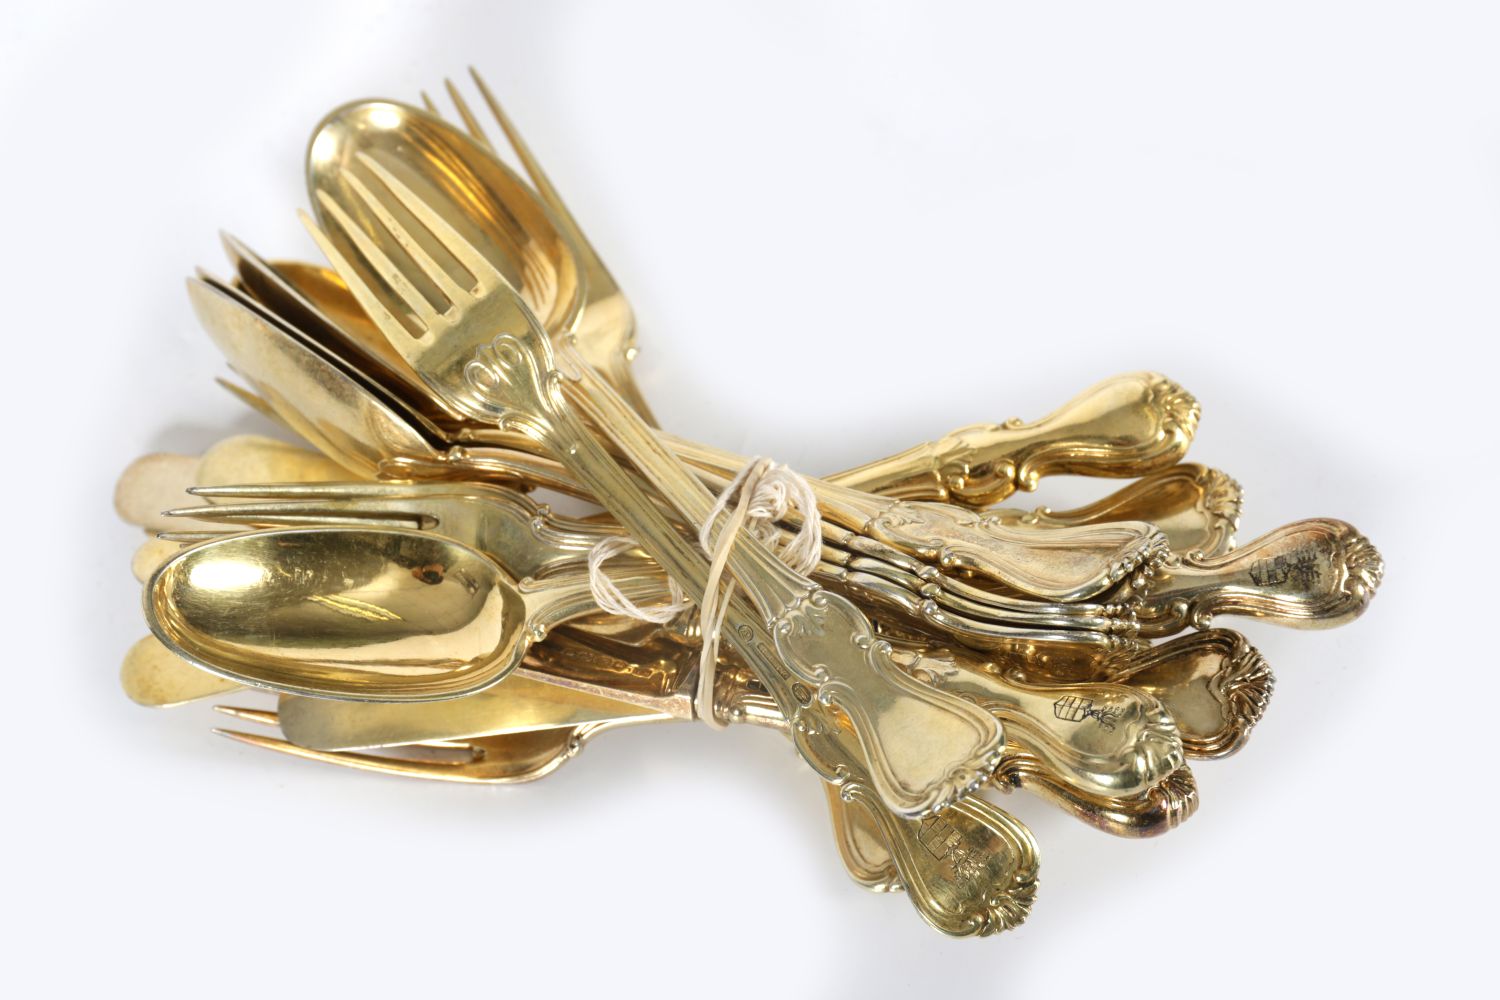 SET OF GILDED SILVER CUTLERY: